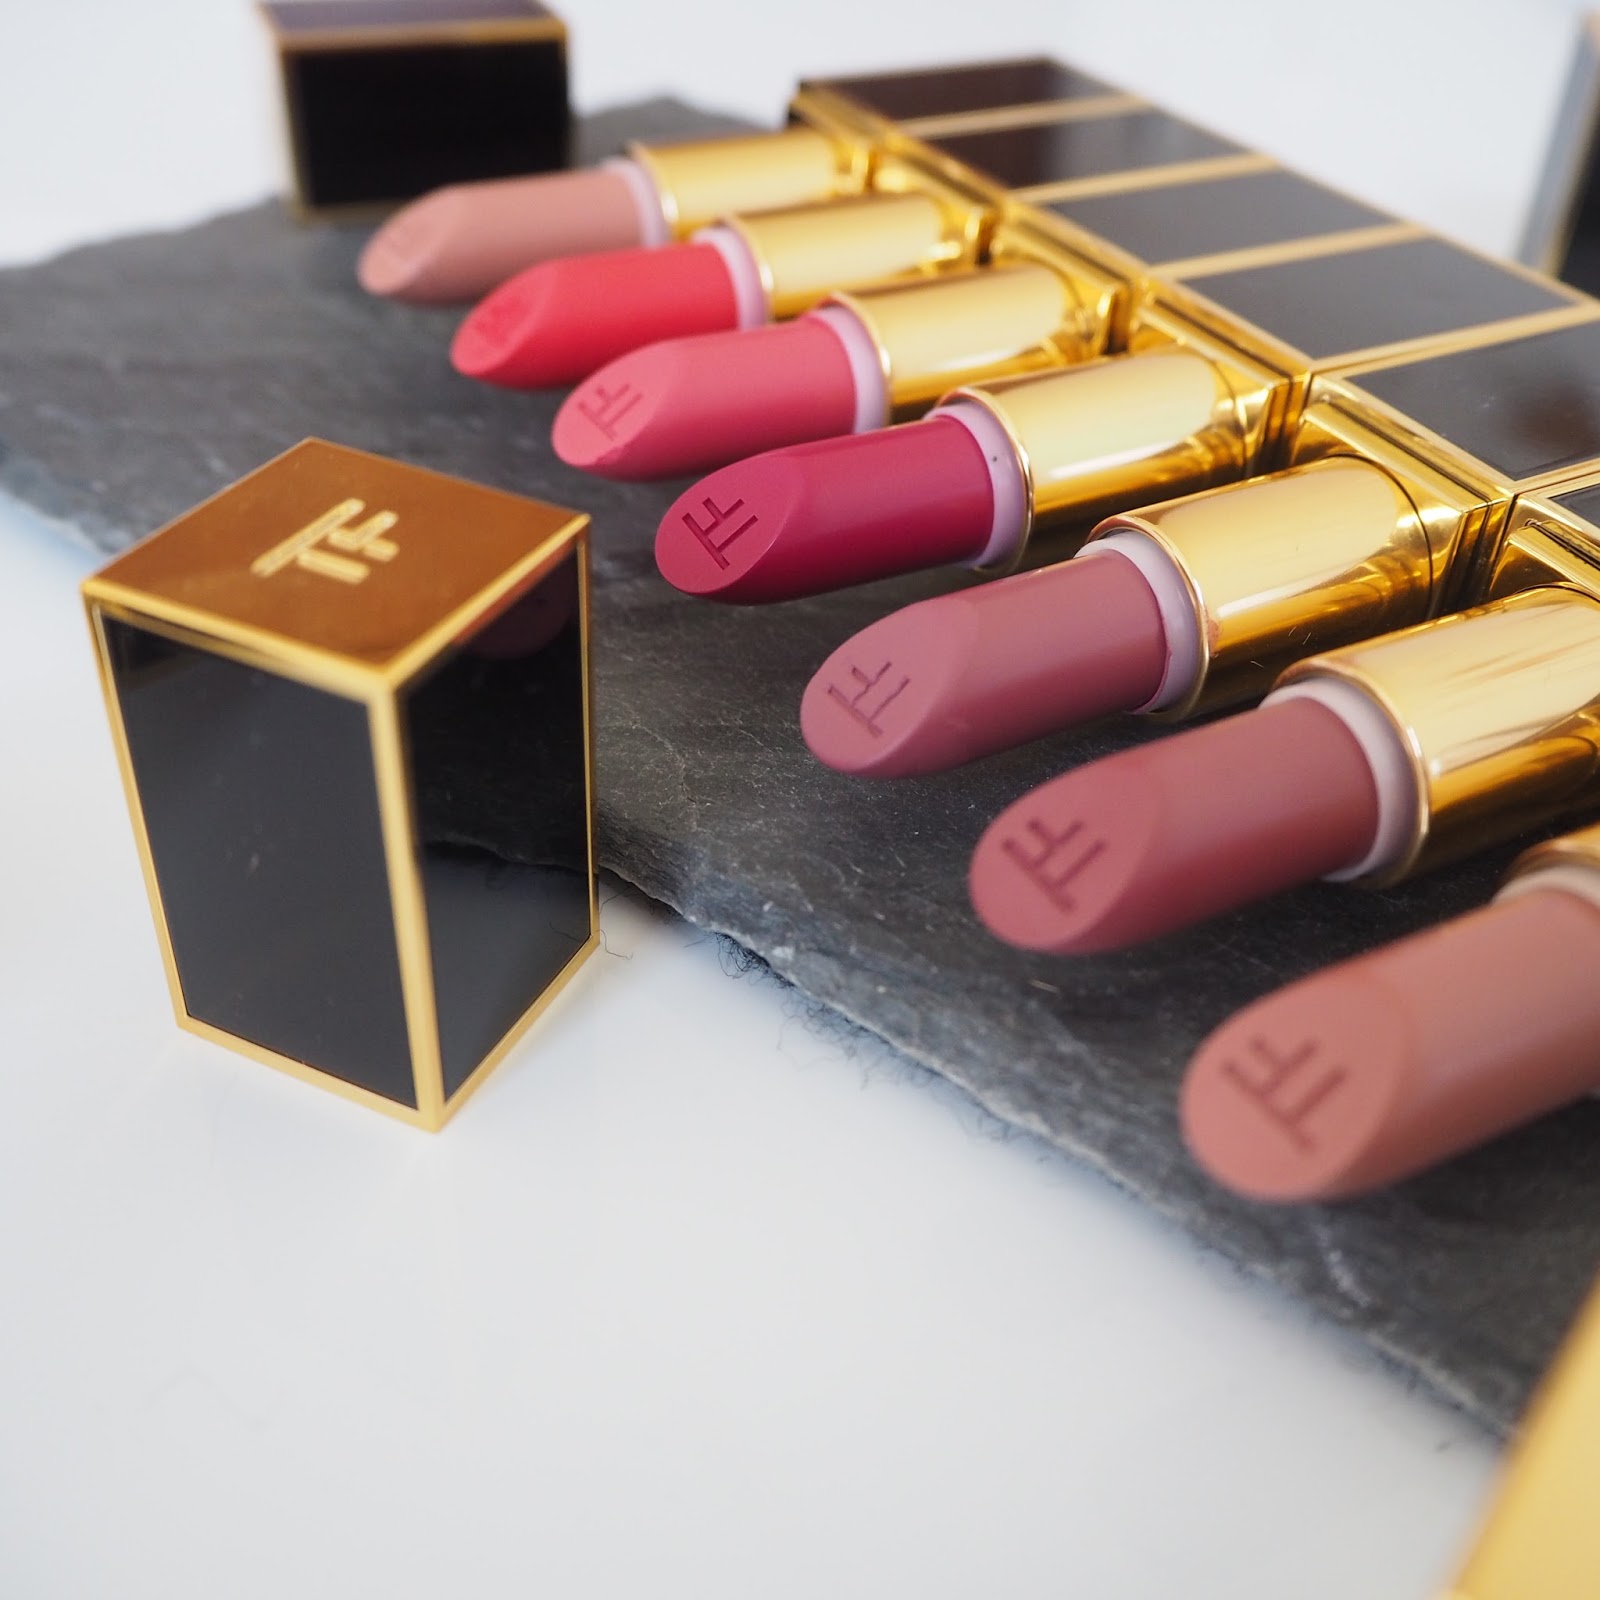 tom ford lipstick review